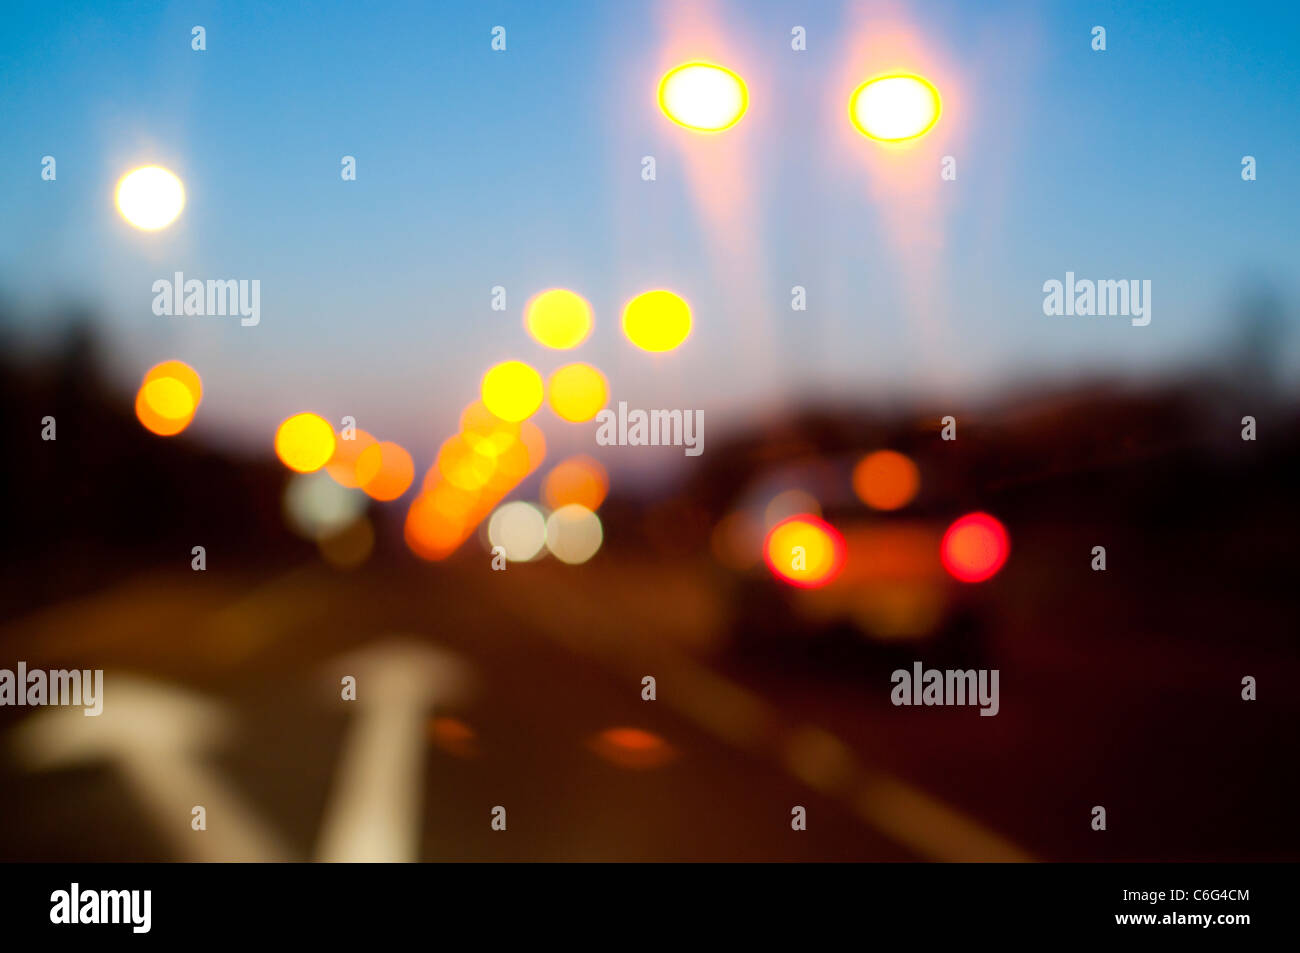 Street lights and car tail lights on a road at dusk Stock Photo